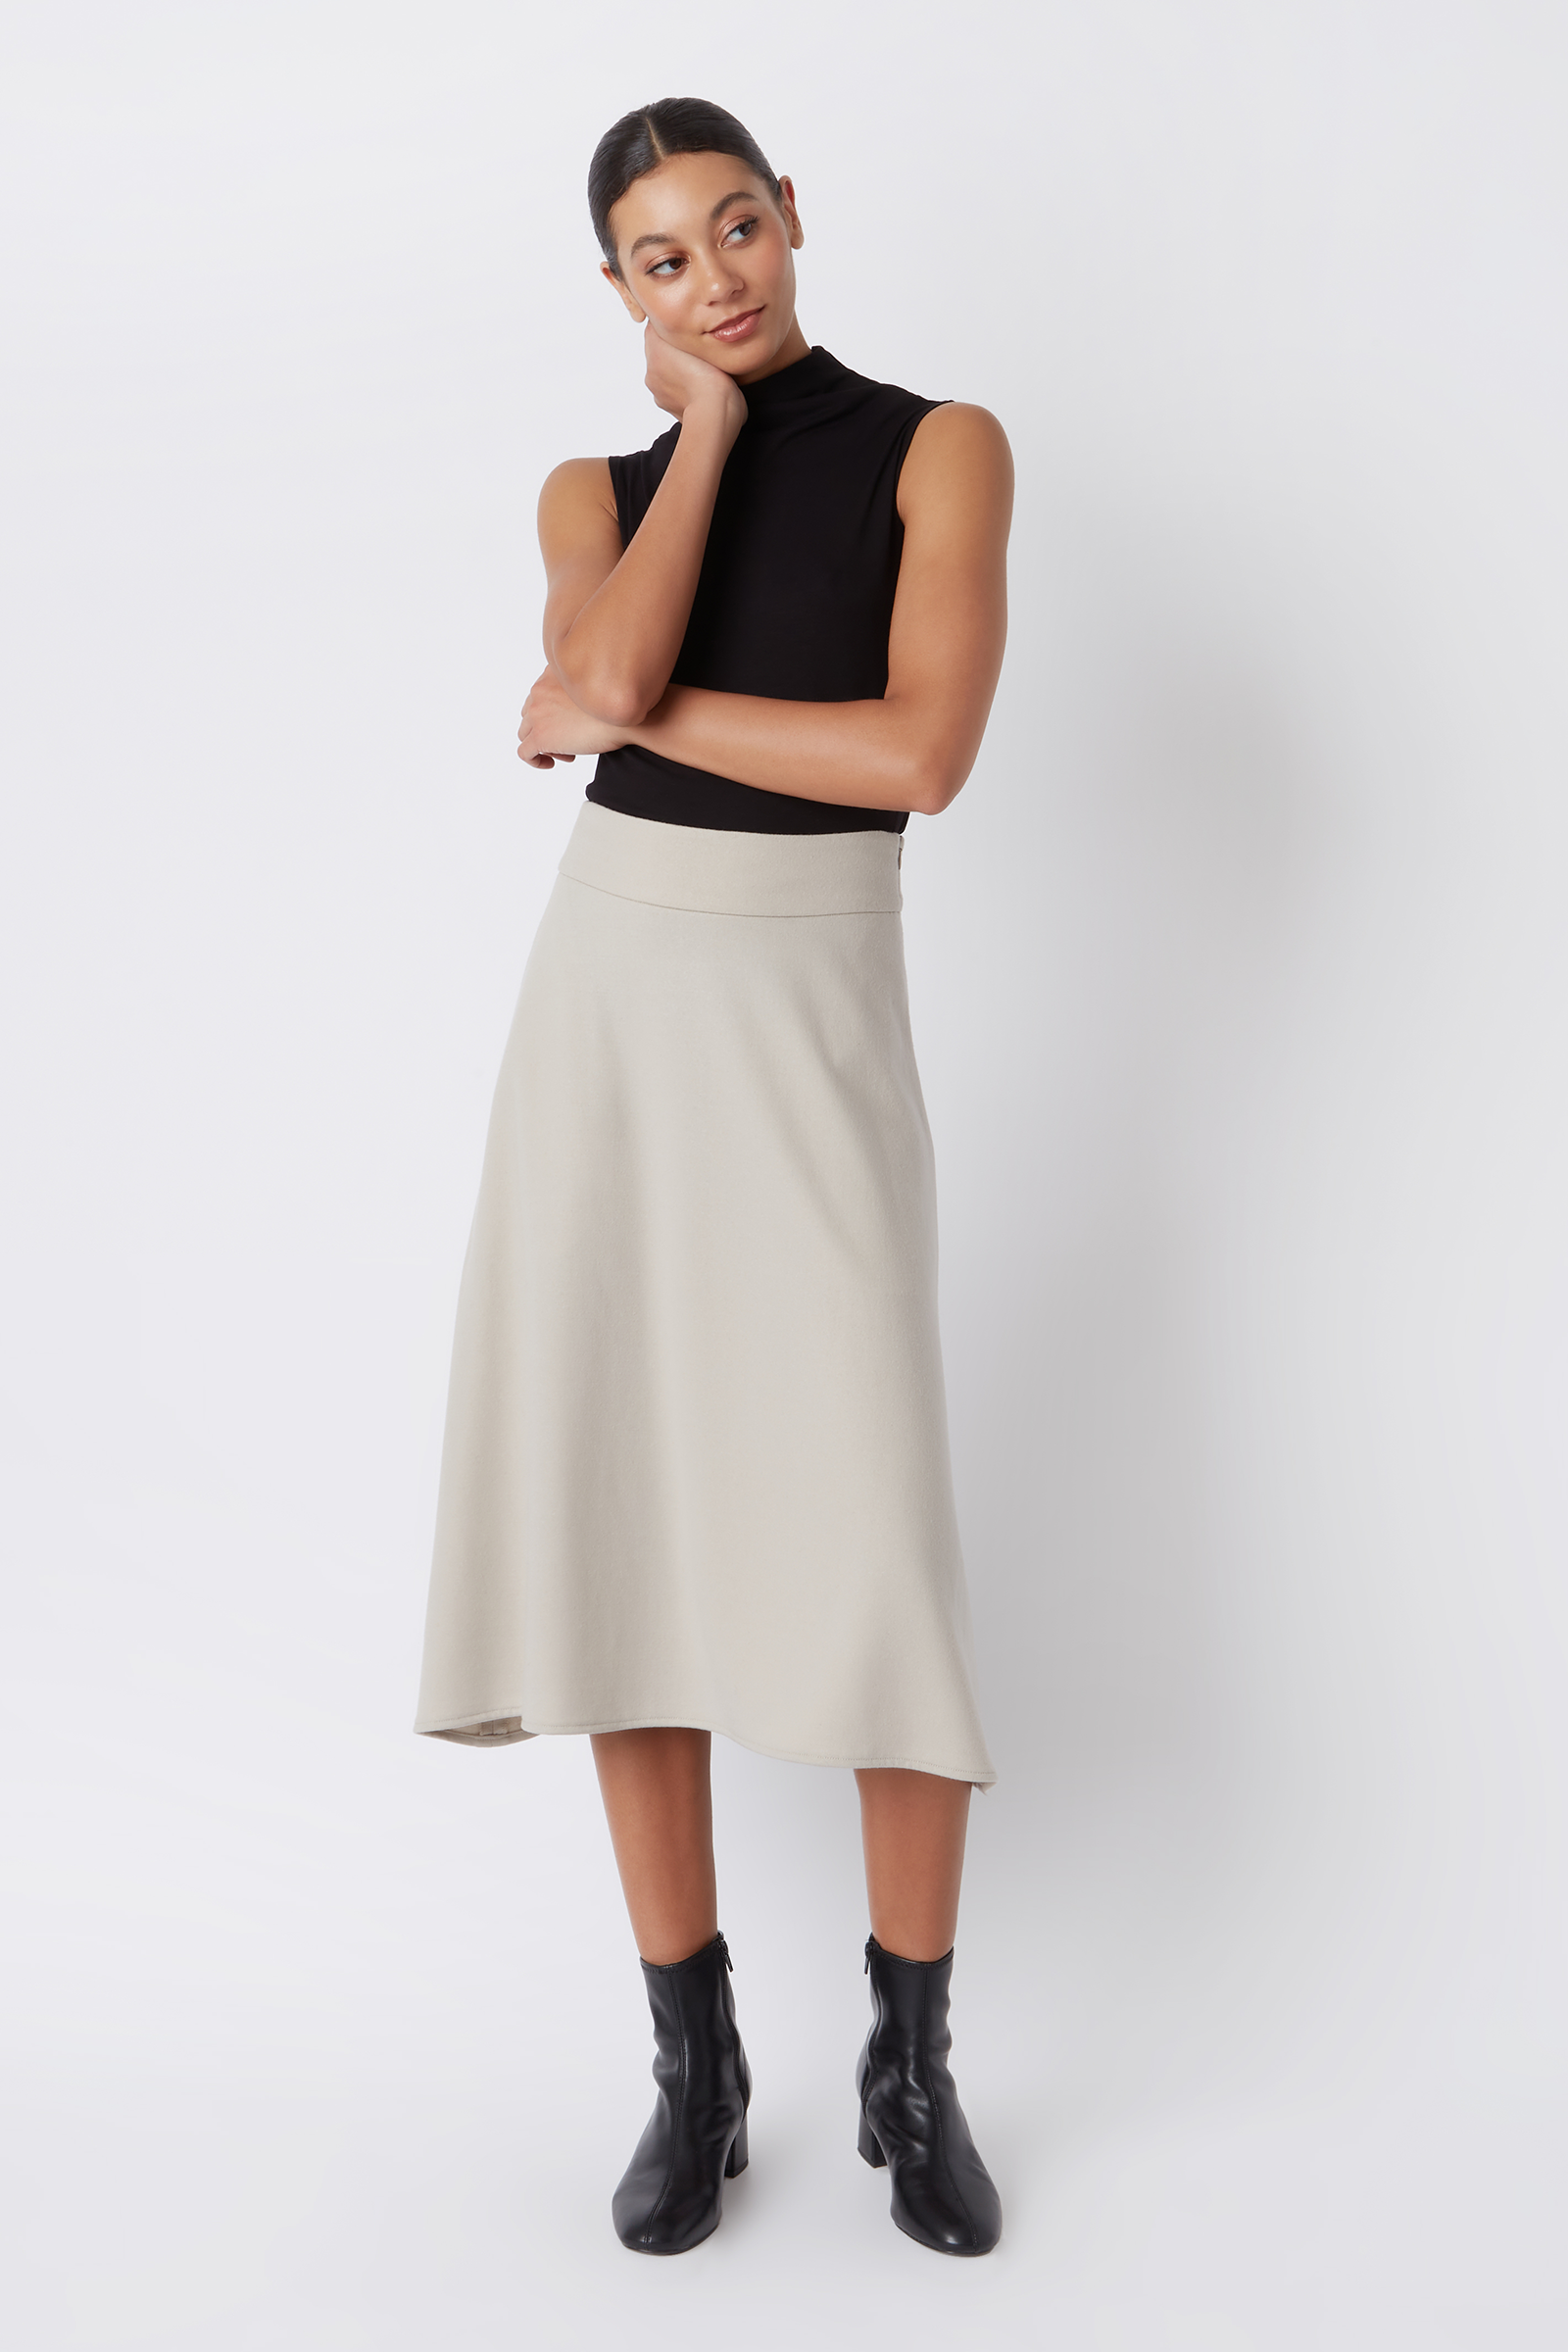 Kal Rieman Martina Felted Jersey Kick Skirt in Mink on Model Main Full Front View